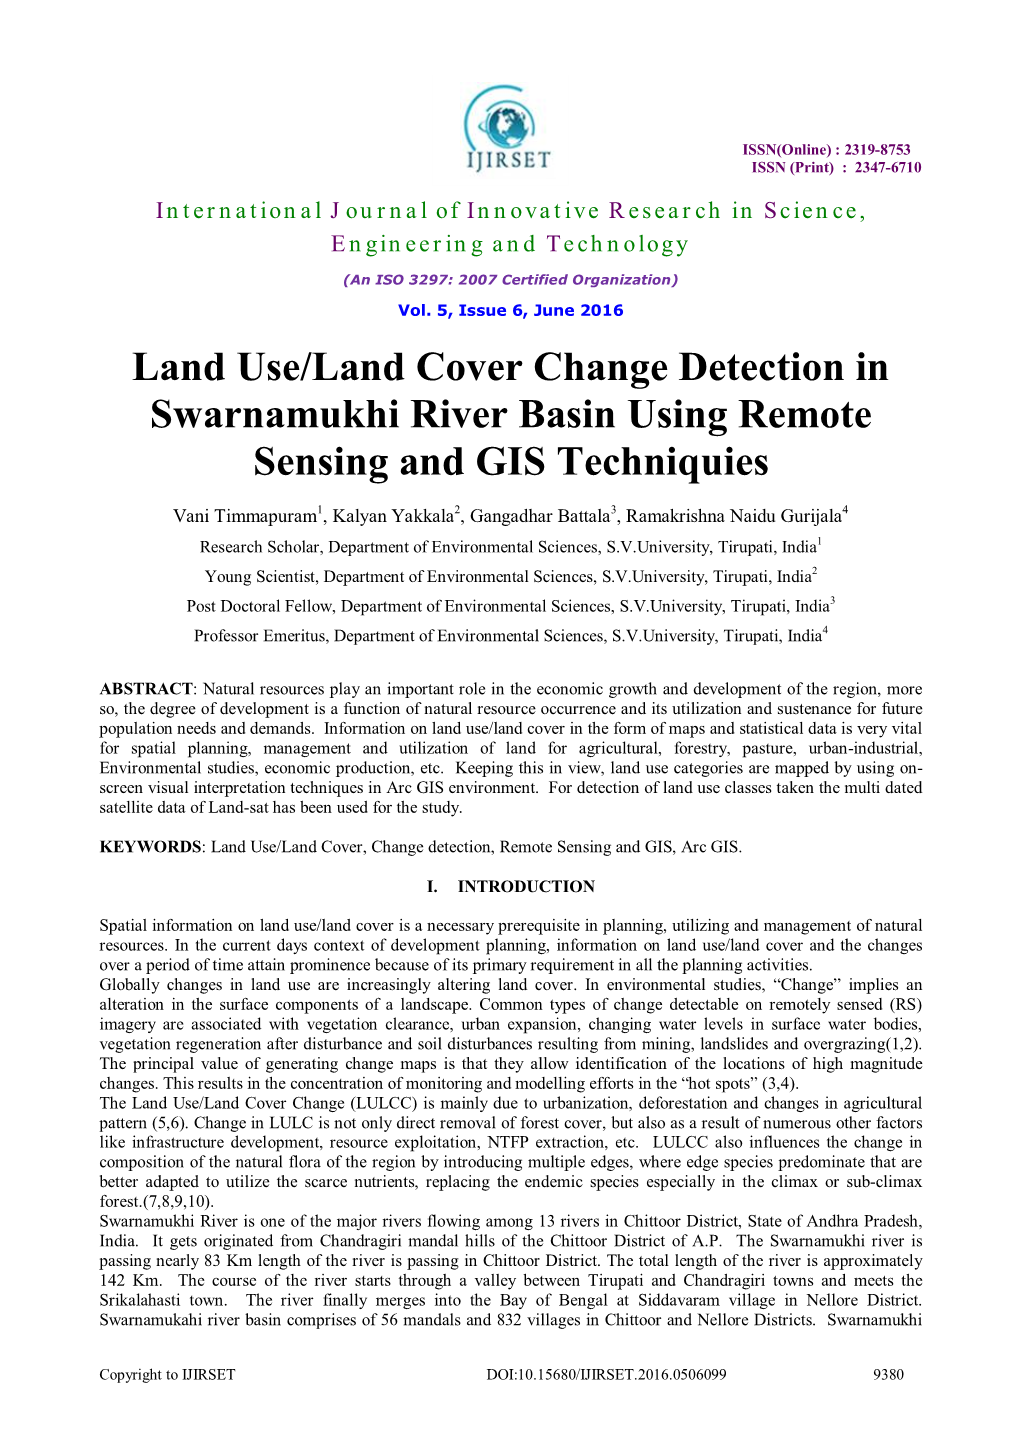 Land Use/Land Cover Change Detection in Swarnamukhi River Basin Using Remote Sensing and GIS Techniquies